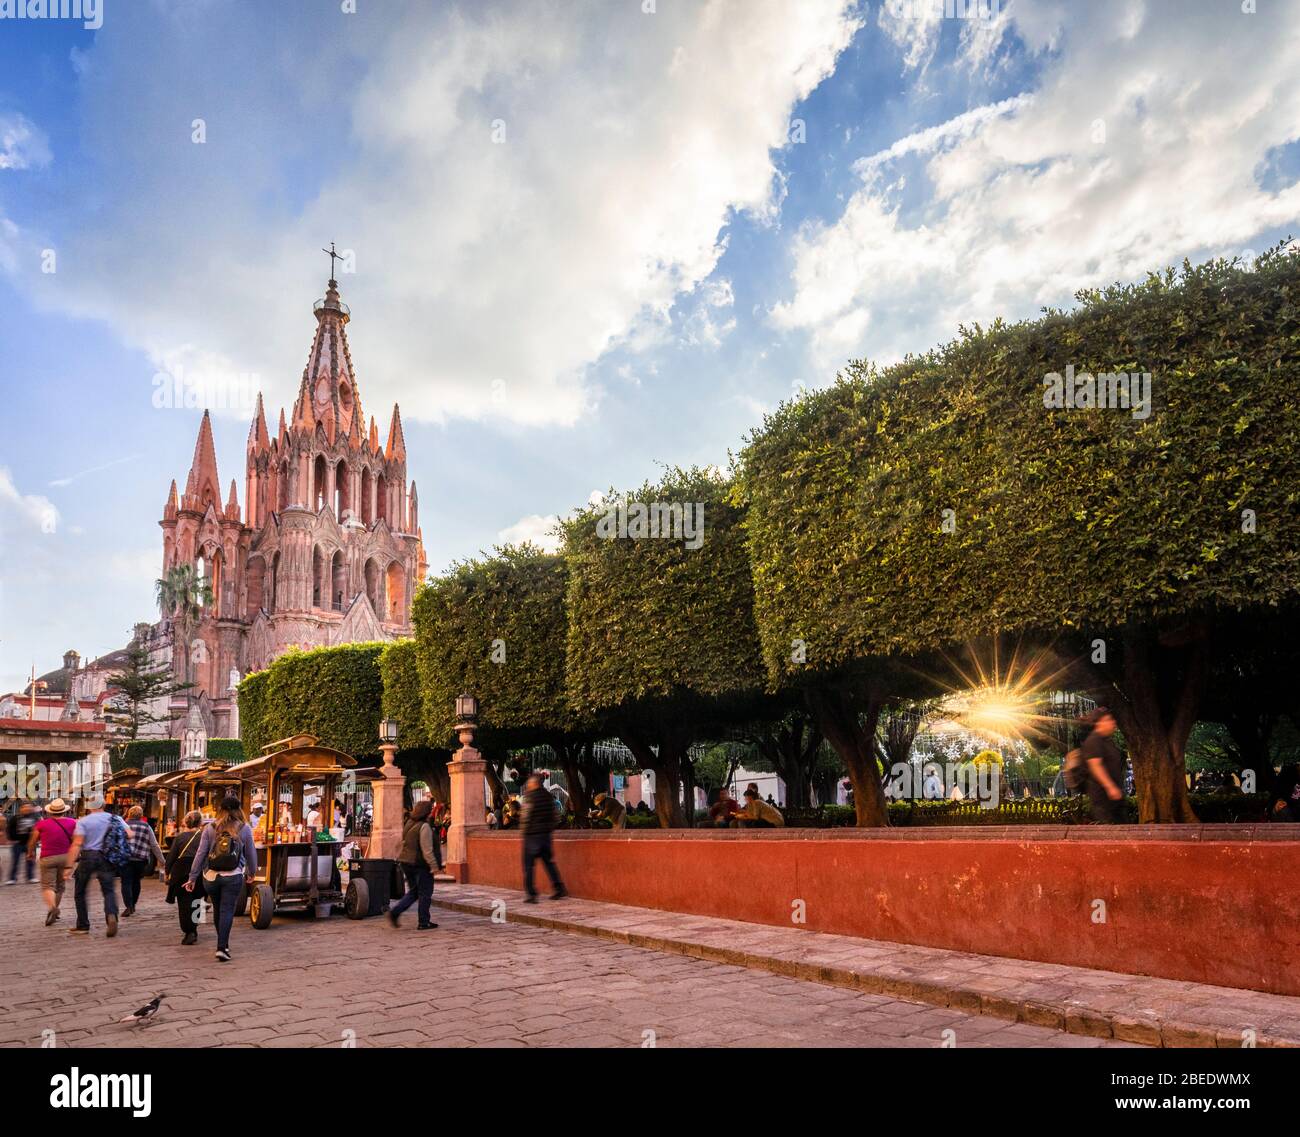 Plaza and Parroquia de San Miguel Arcangel in San Miguel de Allende, Mexico, on a typical afternoon. Stock Photo